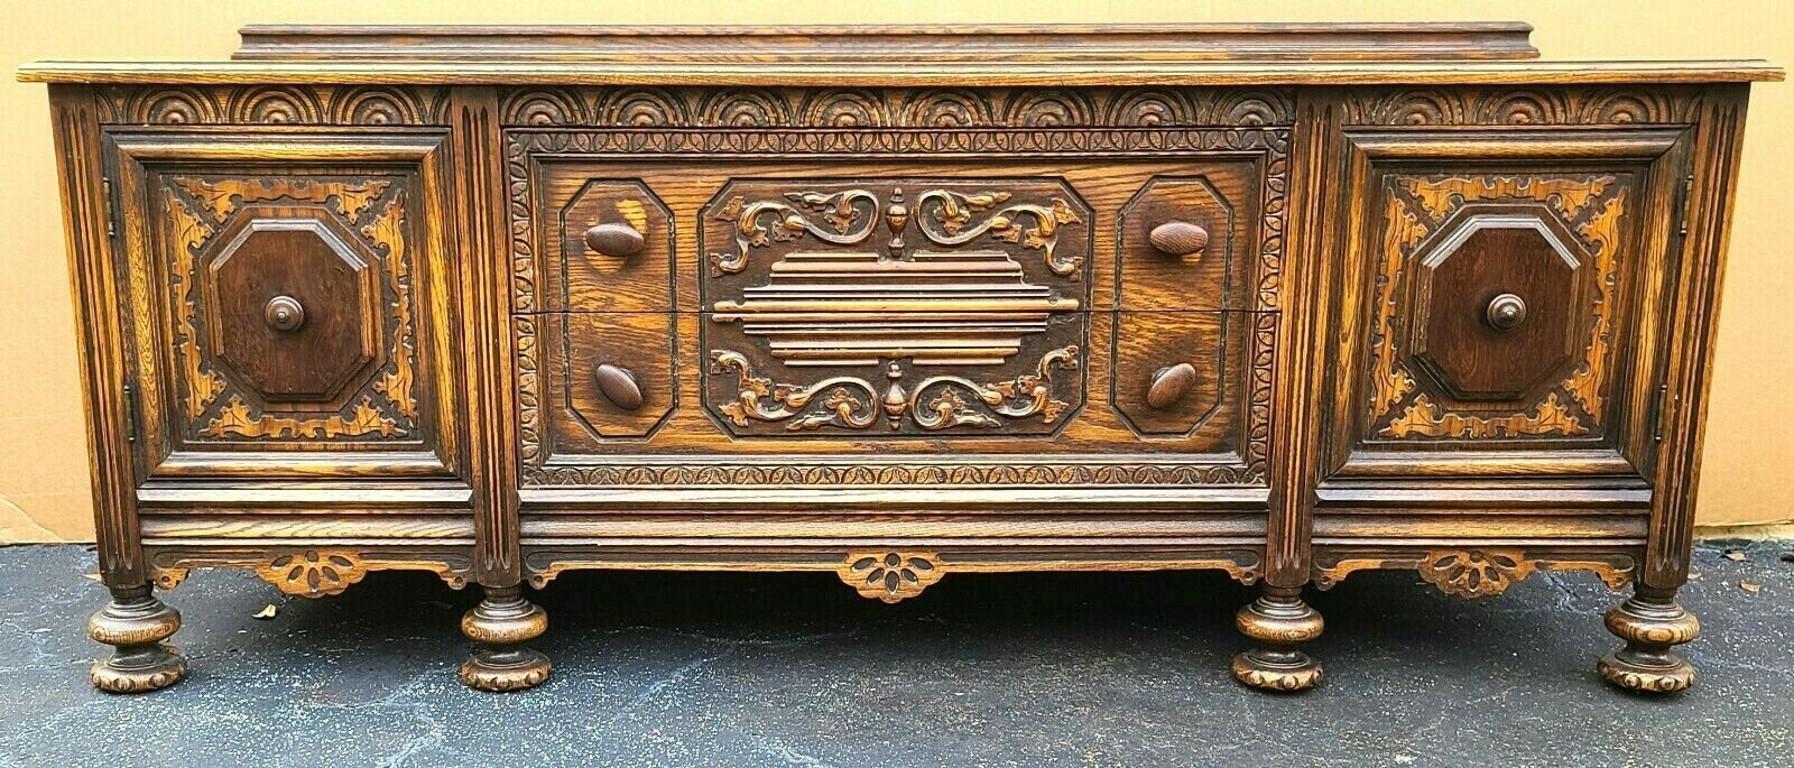 Offering one of our recent palm beach estate fine furniture acquisitions of a
Low profile antique circa 1900 English oak sideboard buffet TV table

Please double-check the measurements you need.
Approximate measurements in inches
25.25